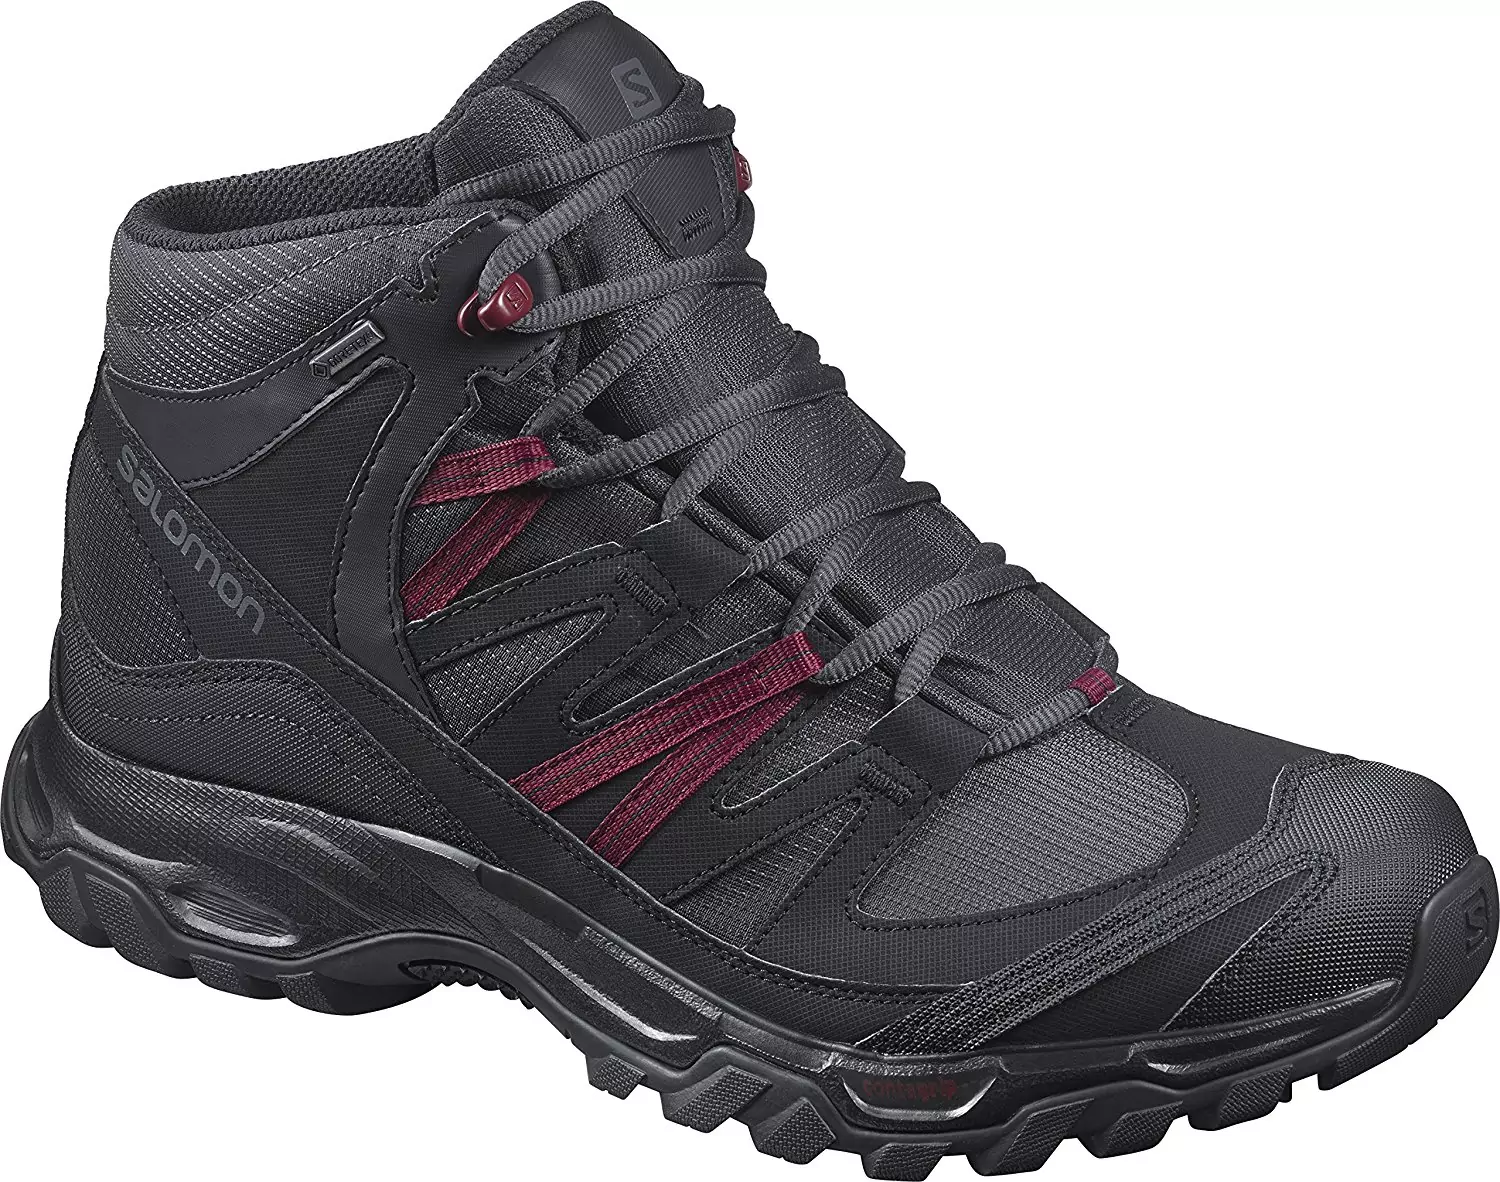 Buy Salomon Mid GTX Running Shoes At Shoes For All